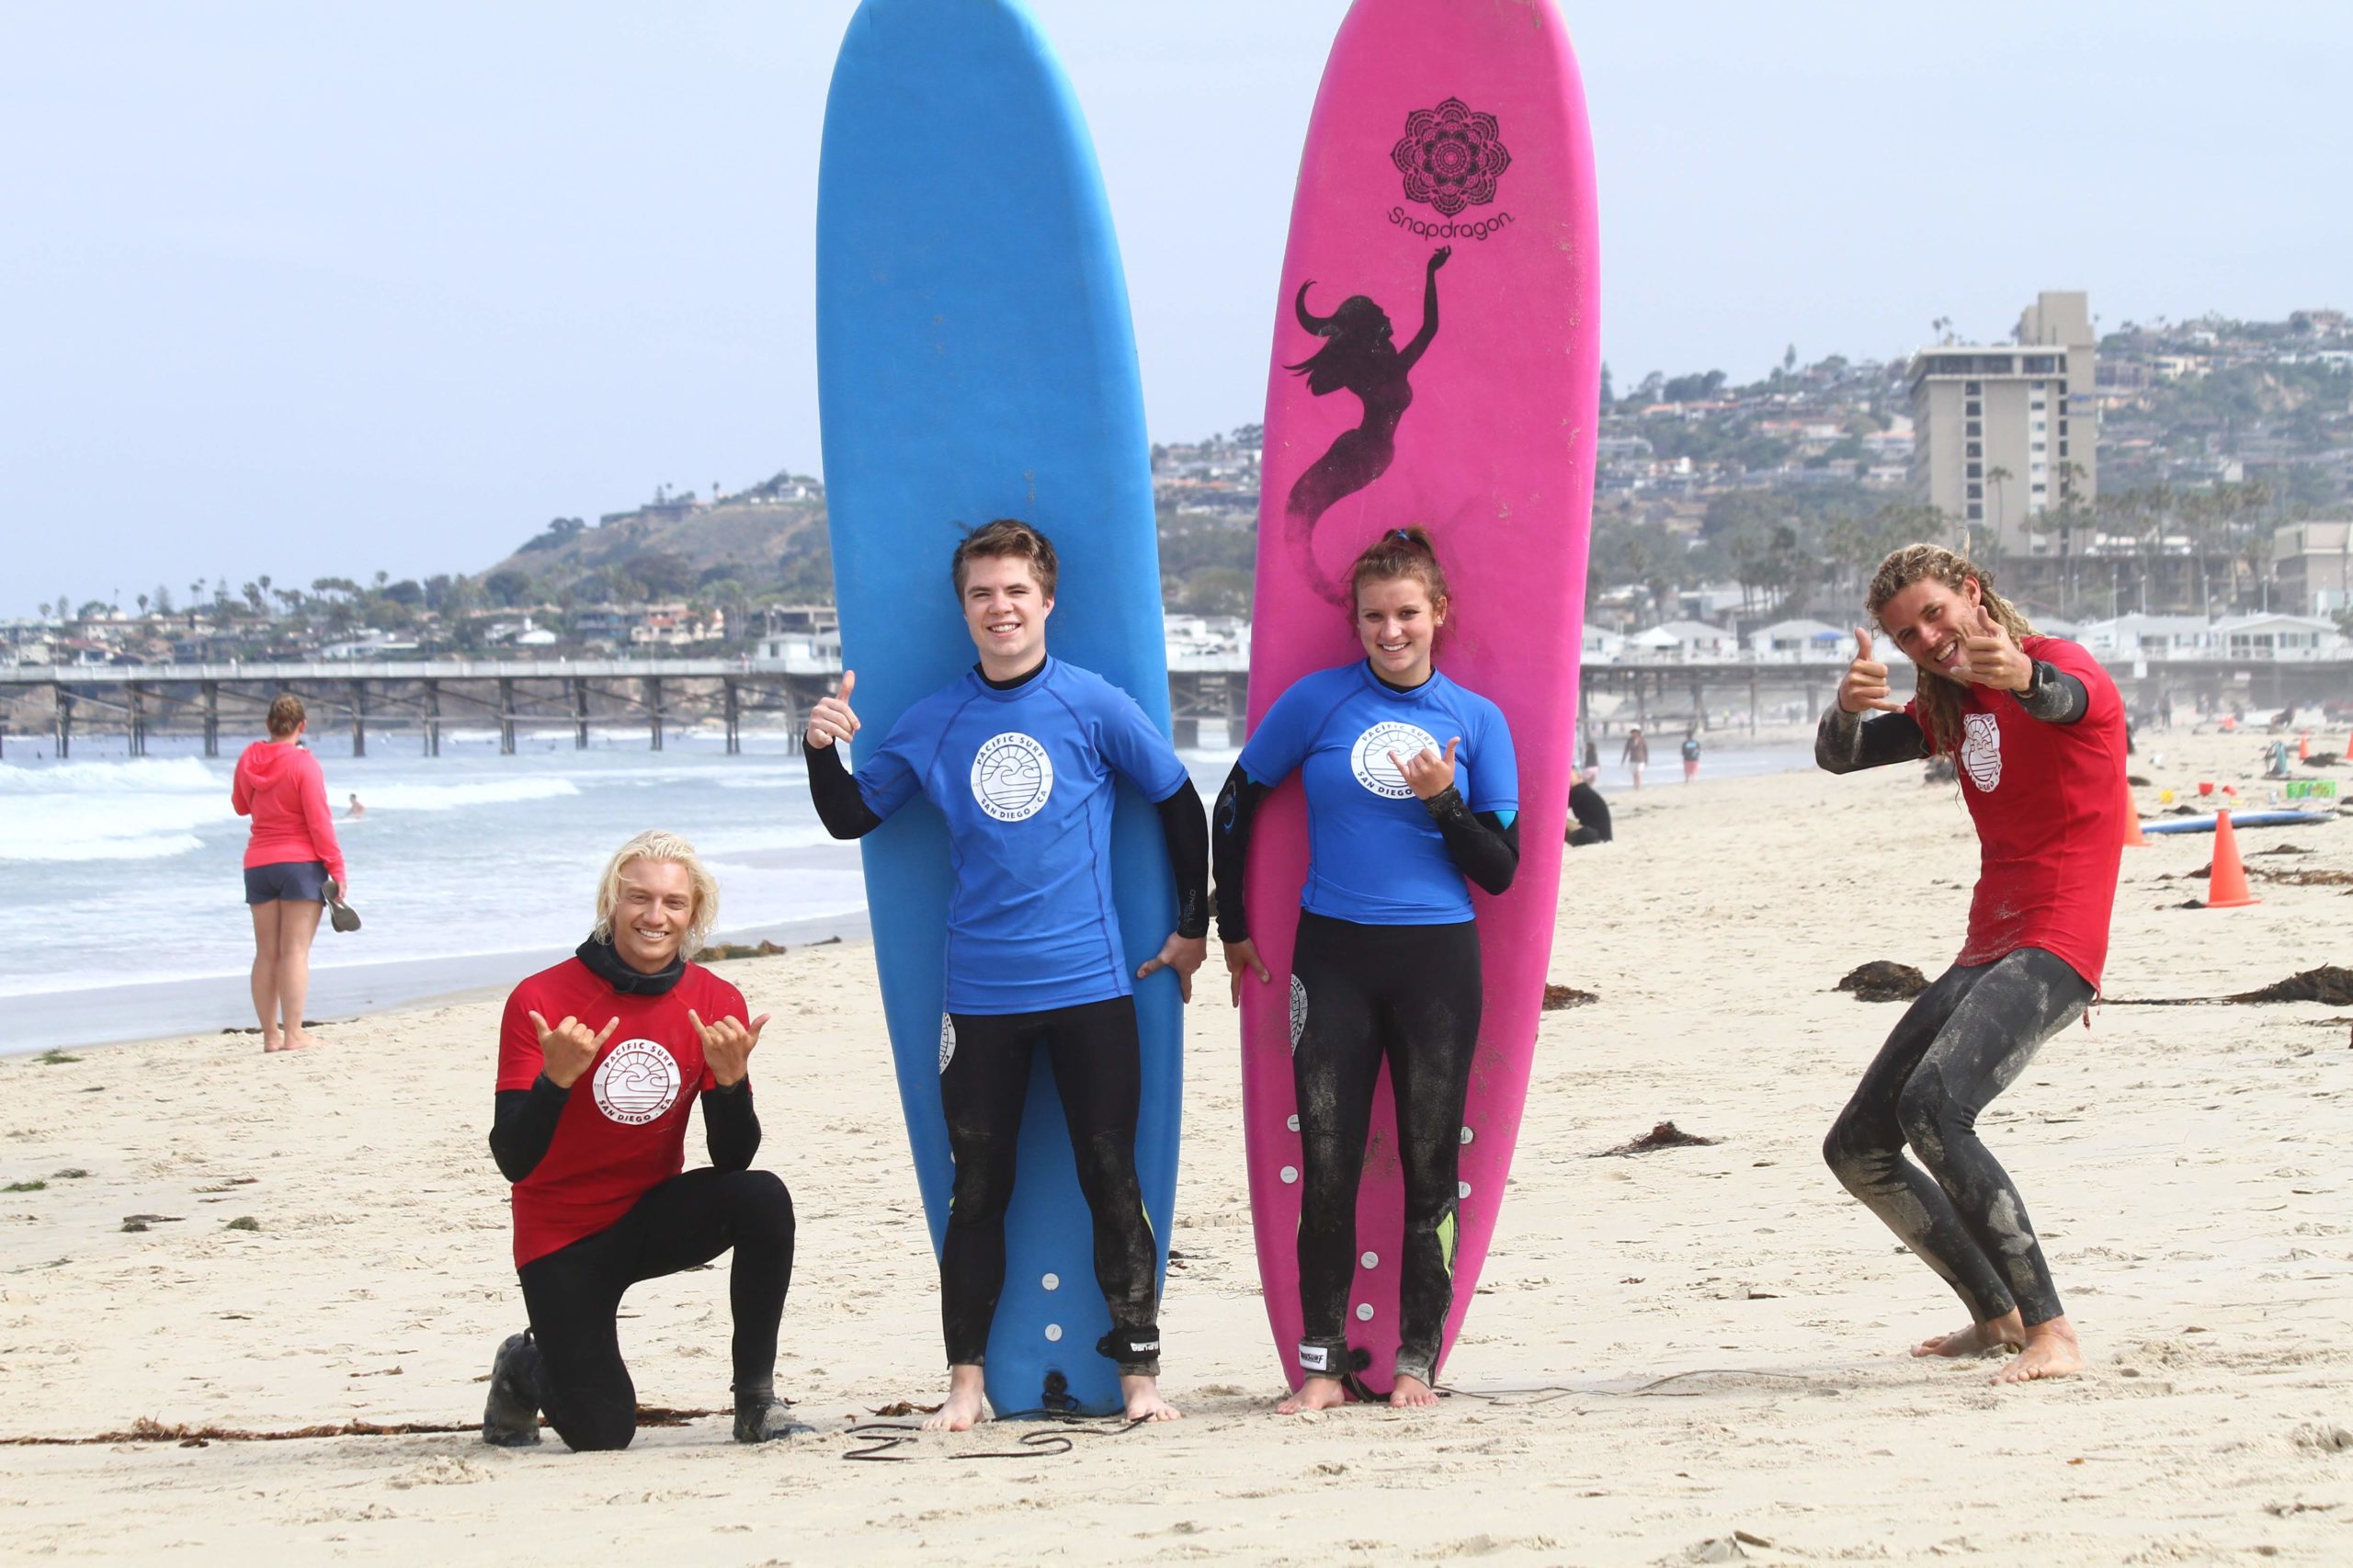 Surf instructors and their surf students posing for a picture on the beach.